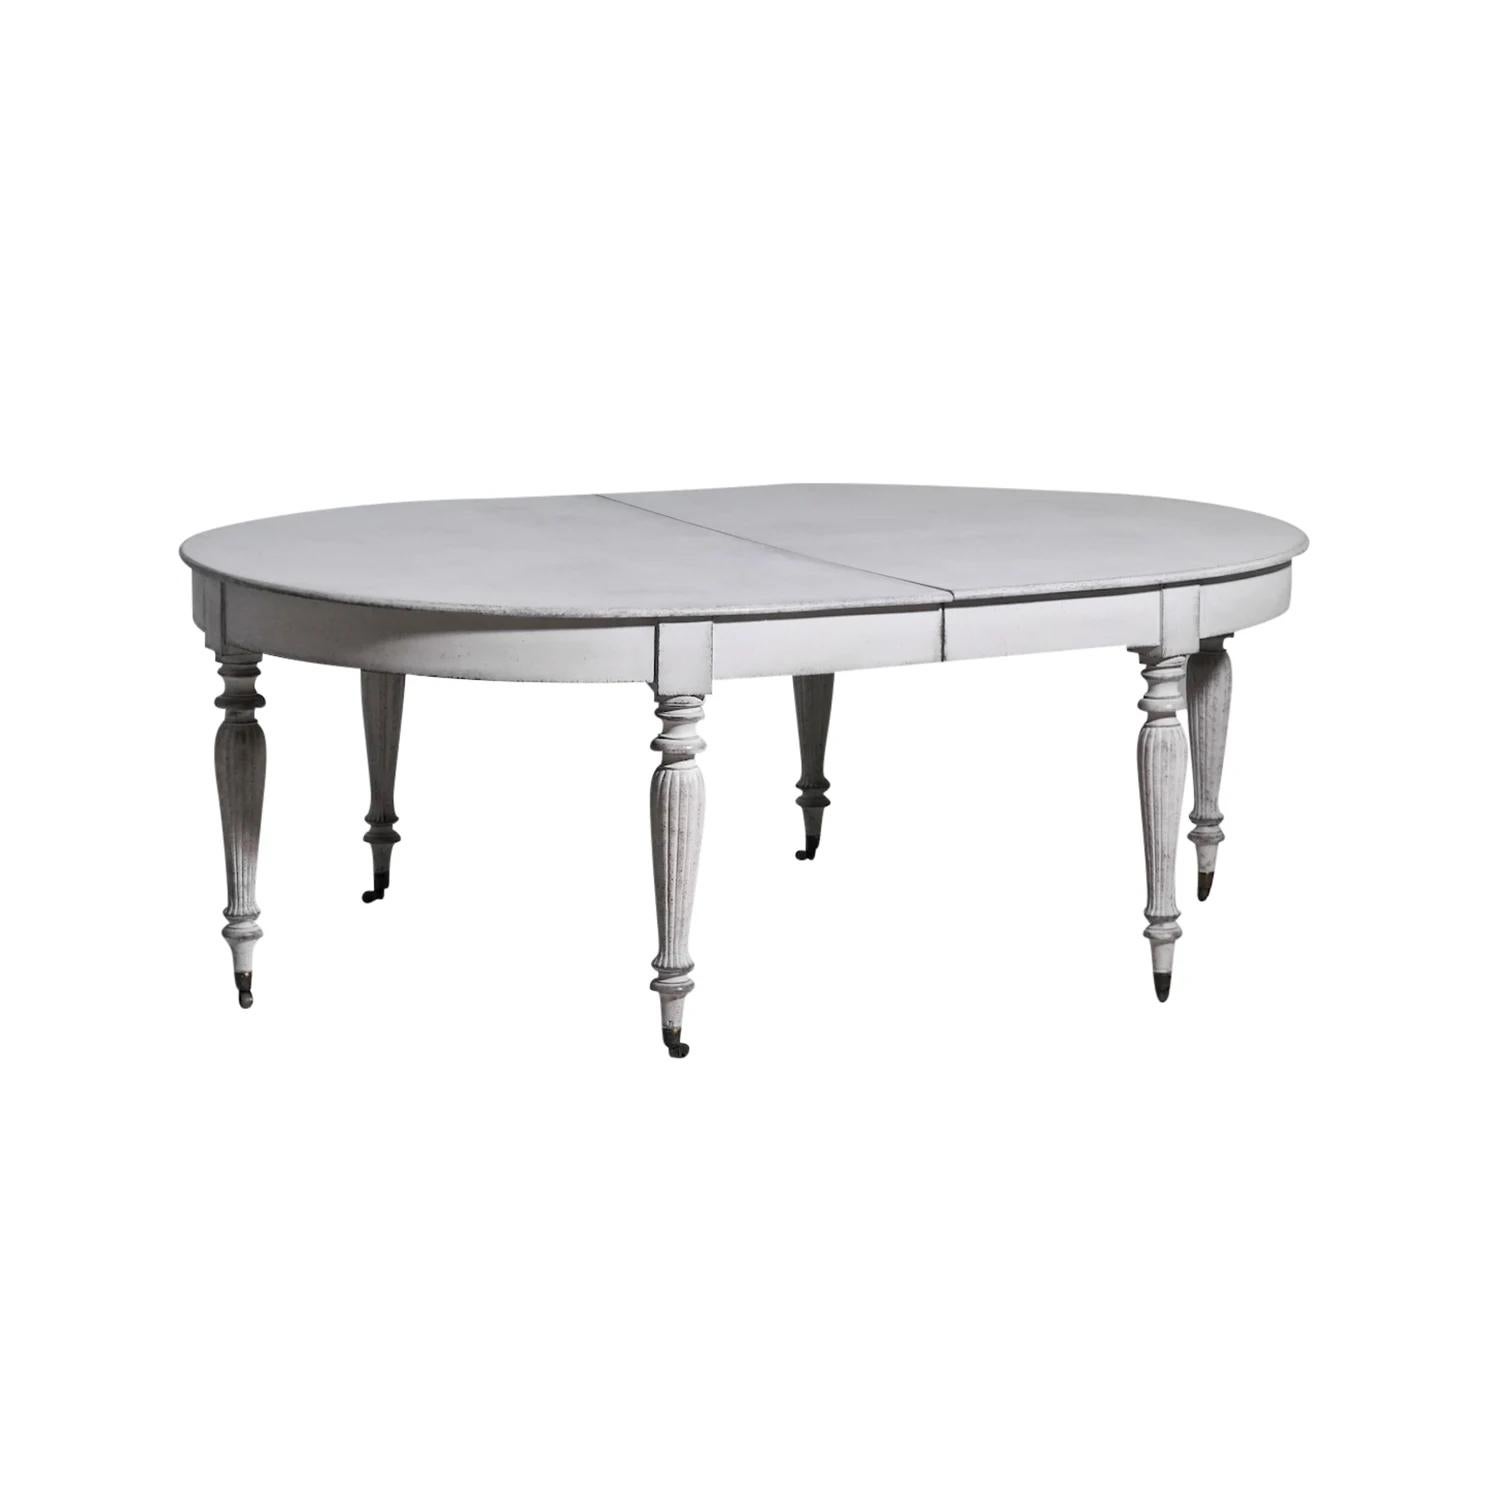 A light-grey, antique Swedish Gustavian extendable dining room table made of hand crafted Pinewood with two leaves and apron. The Scandinavian half round table is standing on six round tapered fluted legs, supported by brass wheels, detailed in the